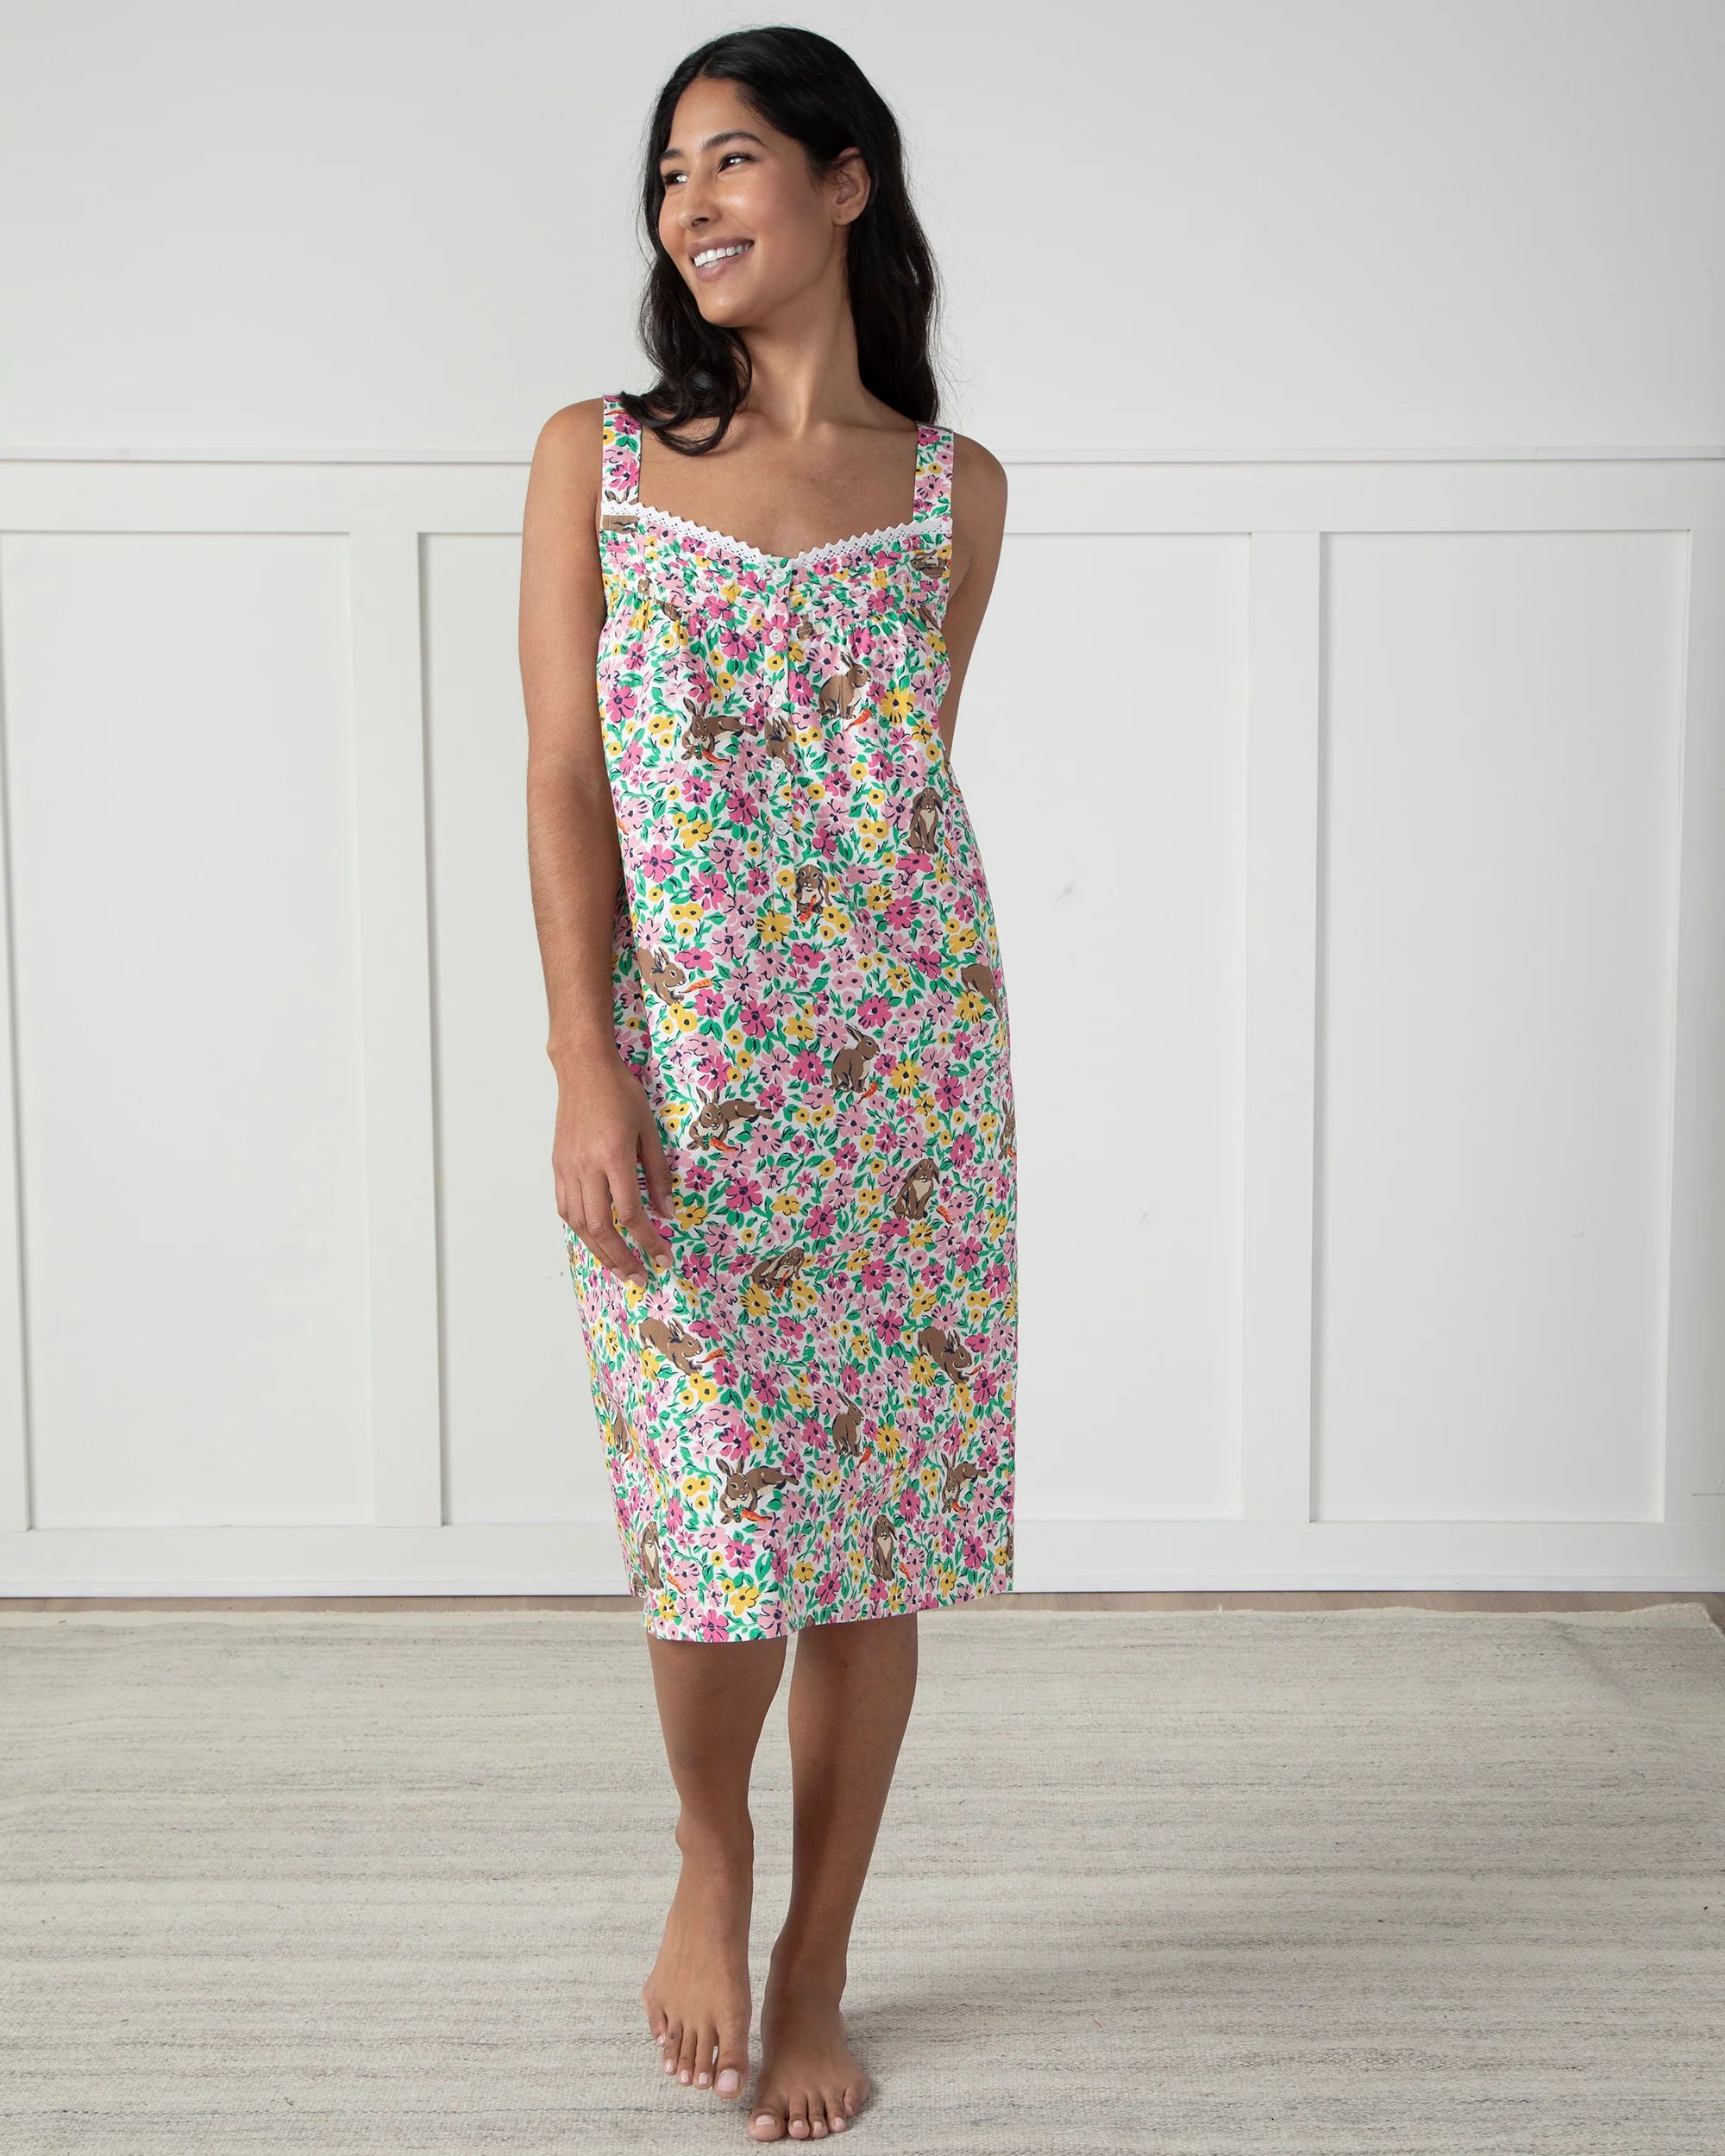 Bunny Trail - Back to Bed Nightgown - Spring Meadow | Printfresh